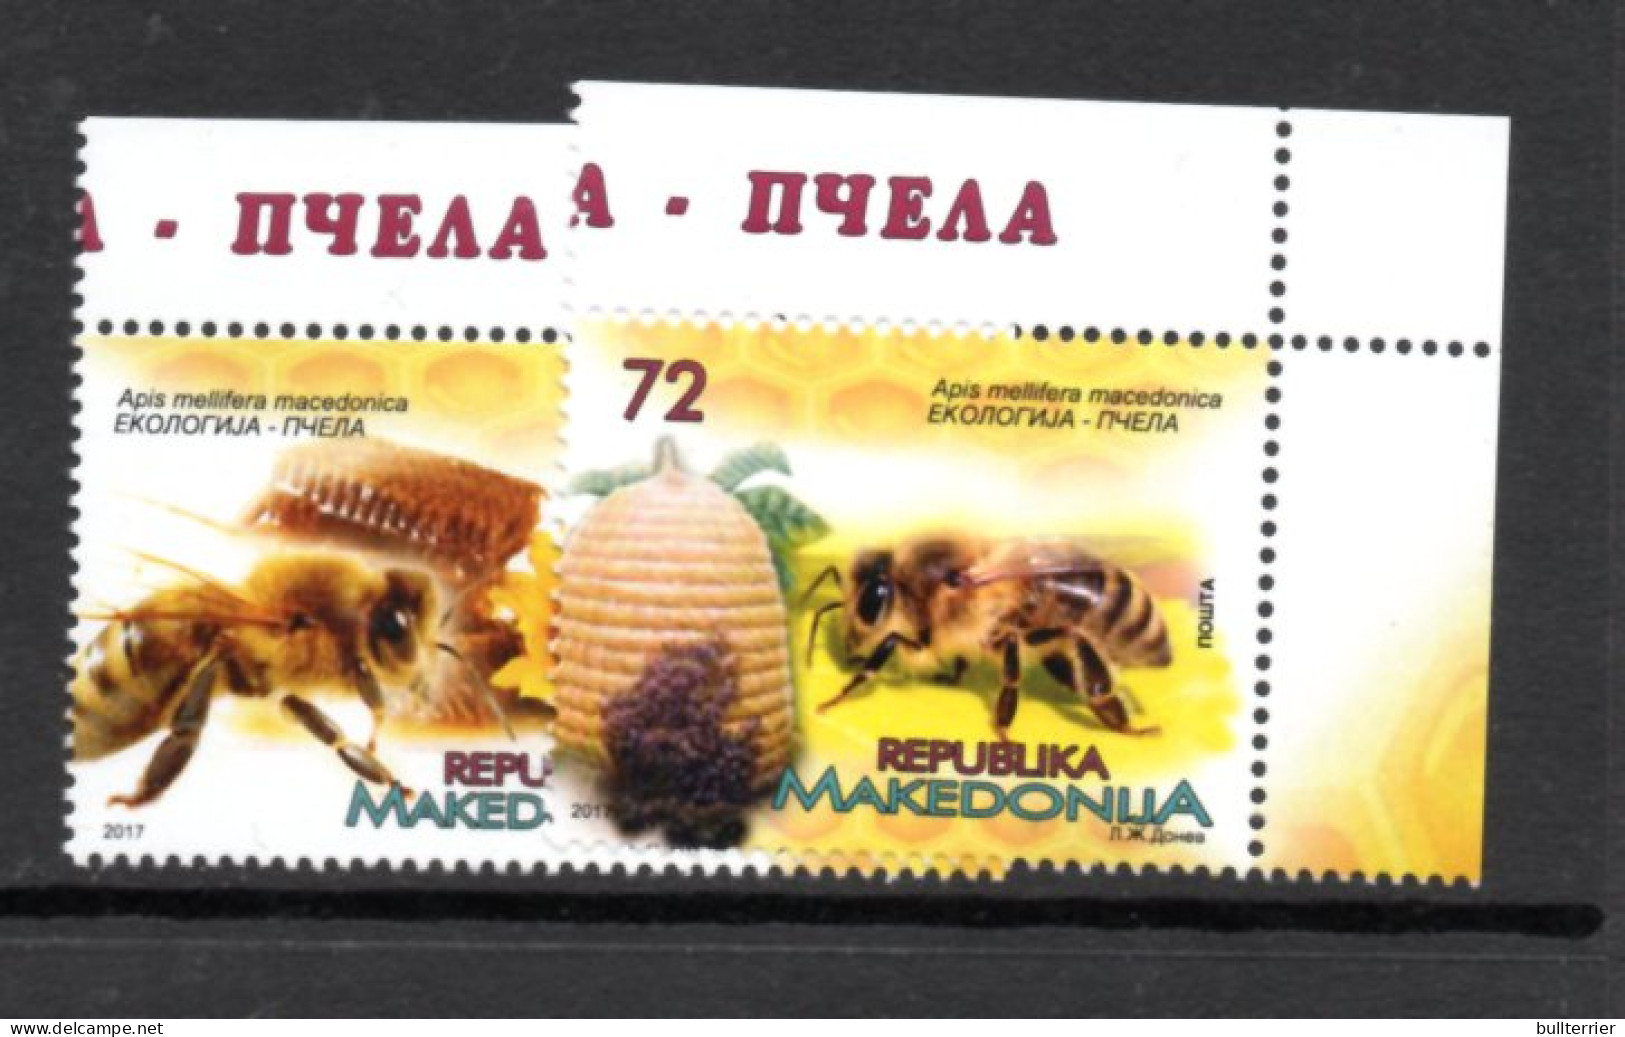 INSECTS - MACEDONIA - 2017 - HONEY BEES SET OF 2  MINT NEVER HINGED  - Abeilles